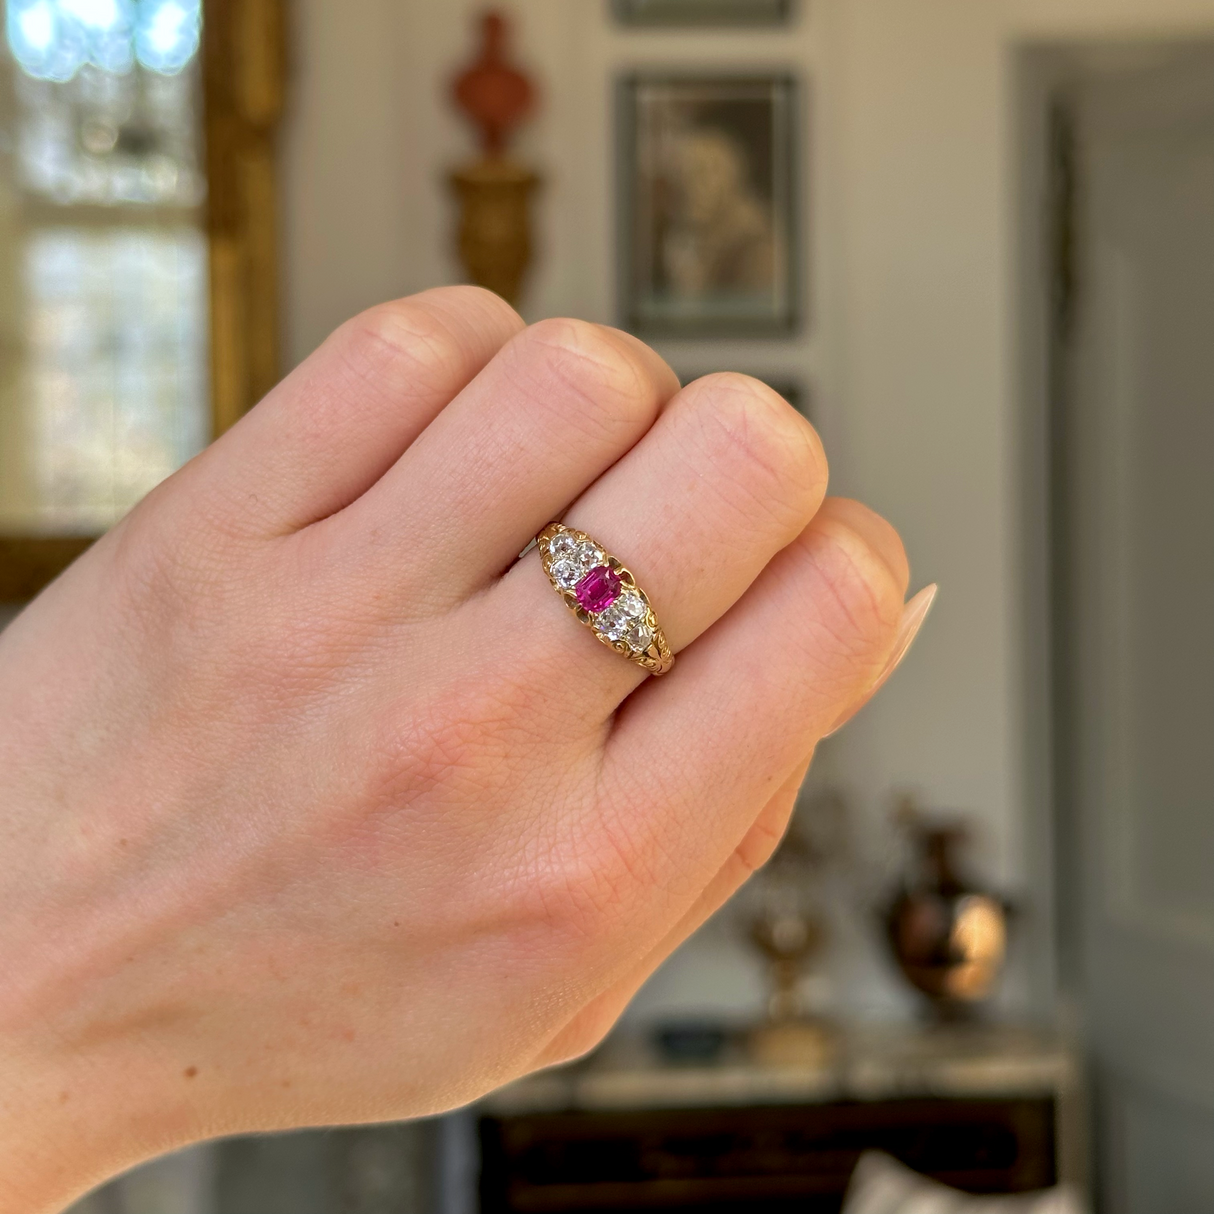 Antique, Victorian Burmese Ruby and Diamond Engagement Ring, 18ct Yellow Gold worn on closed hand.